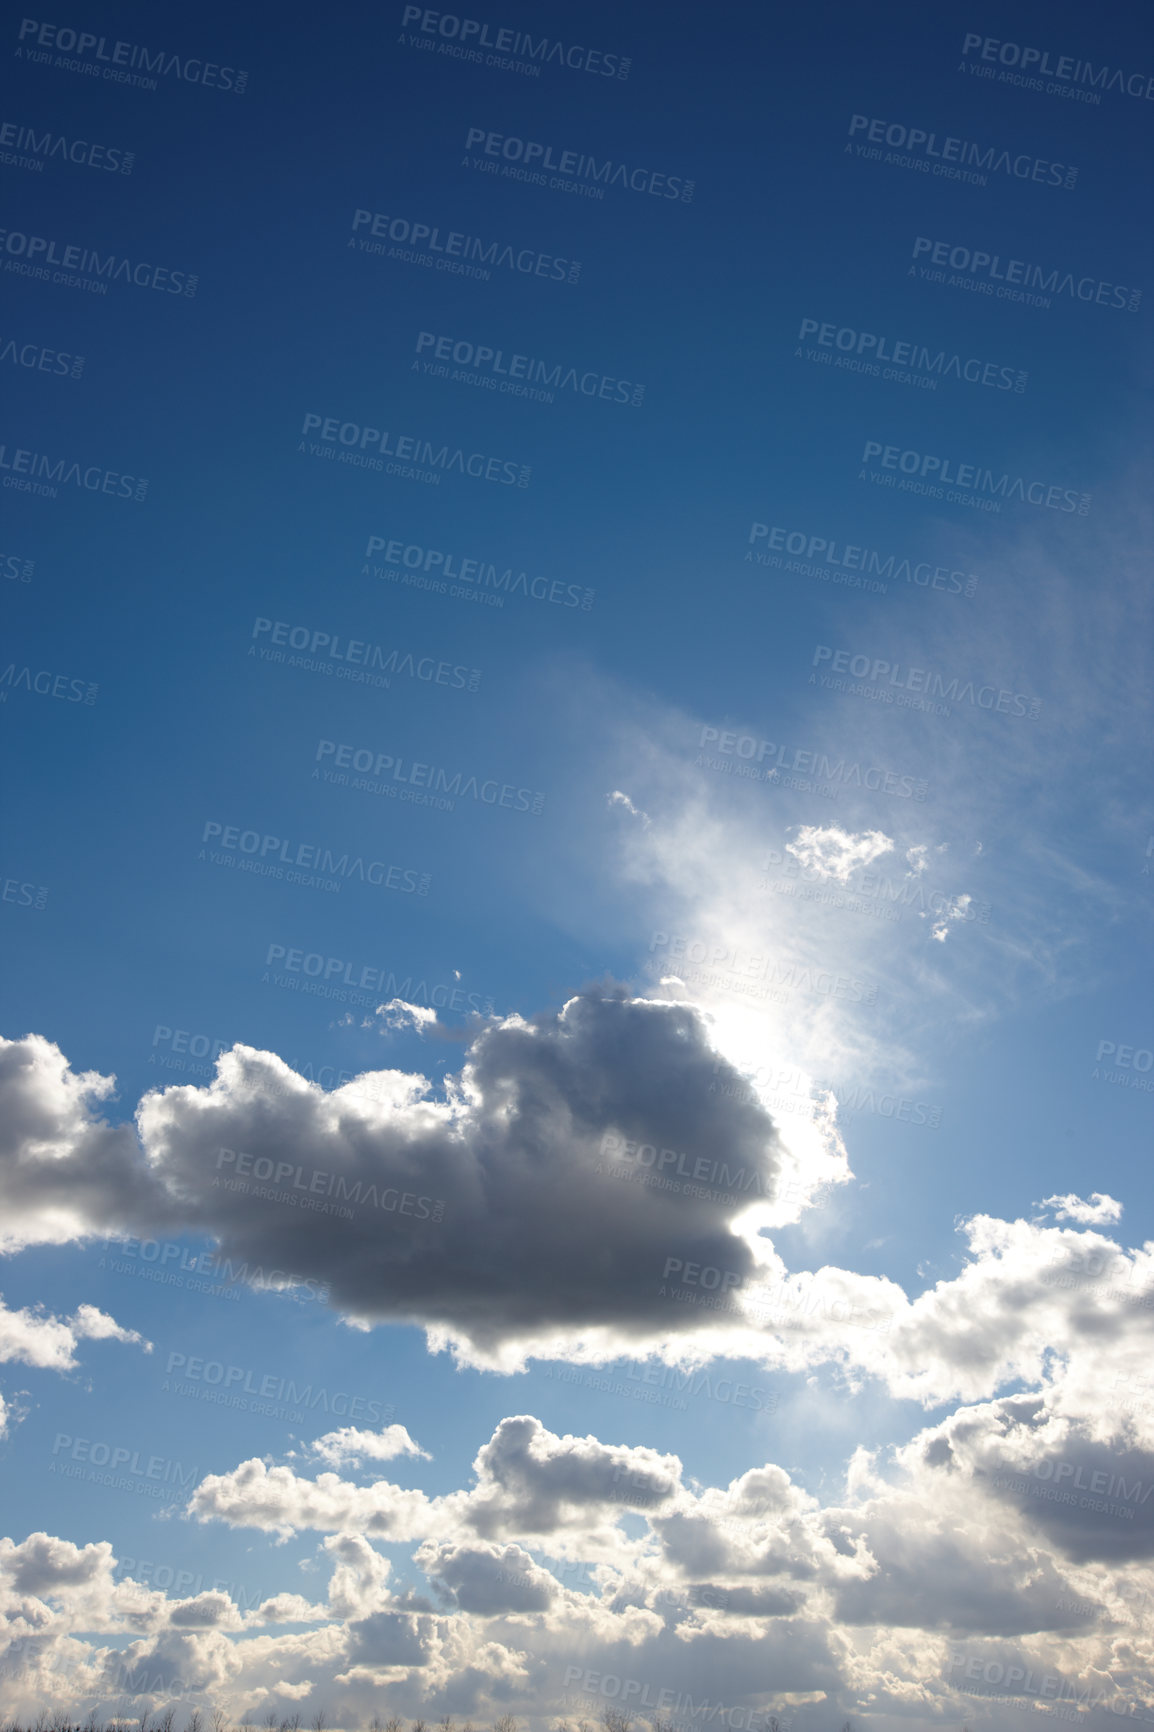 Buy stock photo Copyspace scenic view of a blue cloudy sky with sun shining through. Low landscape view of a cumulus cloud blocking the sun on a sunny day. Beautiful scenery of heavenly clouds with sunlight